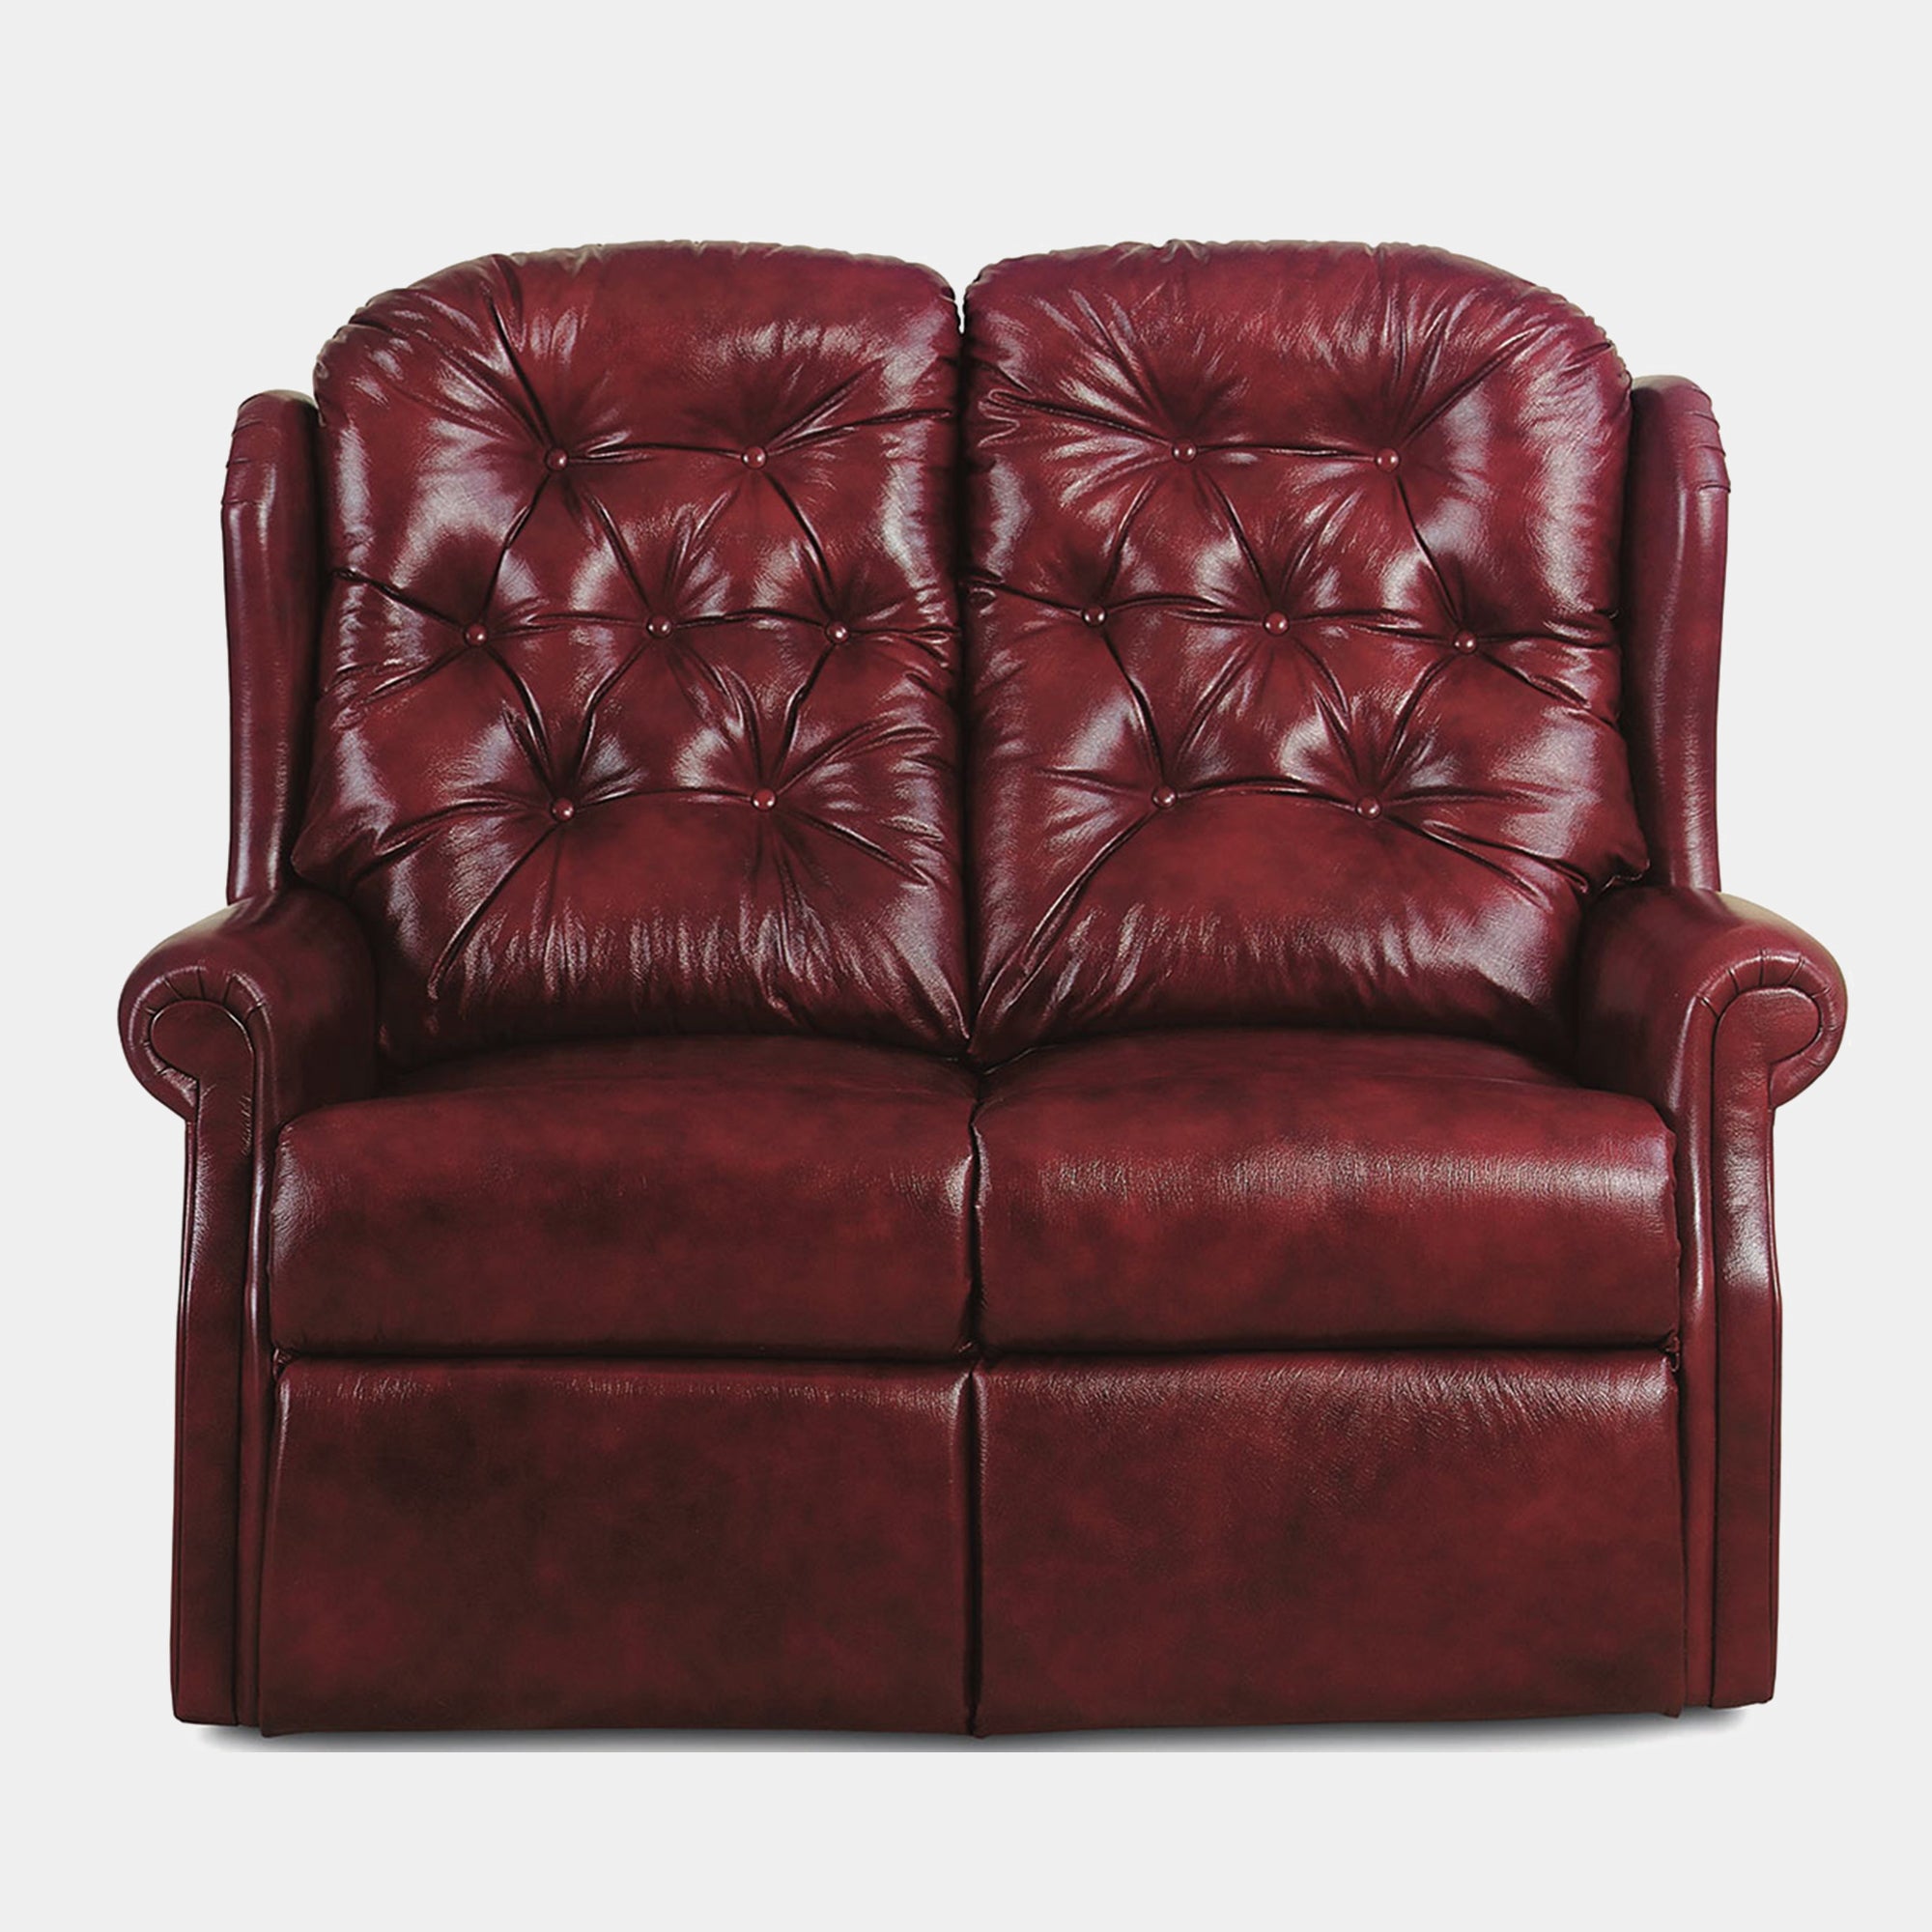 New Burford - Standard Fixed 2 Seat Settee In Leather